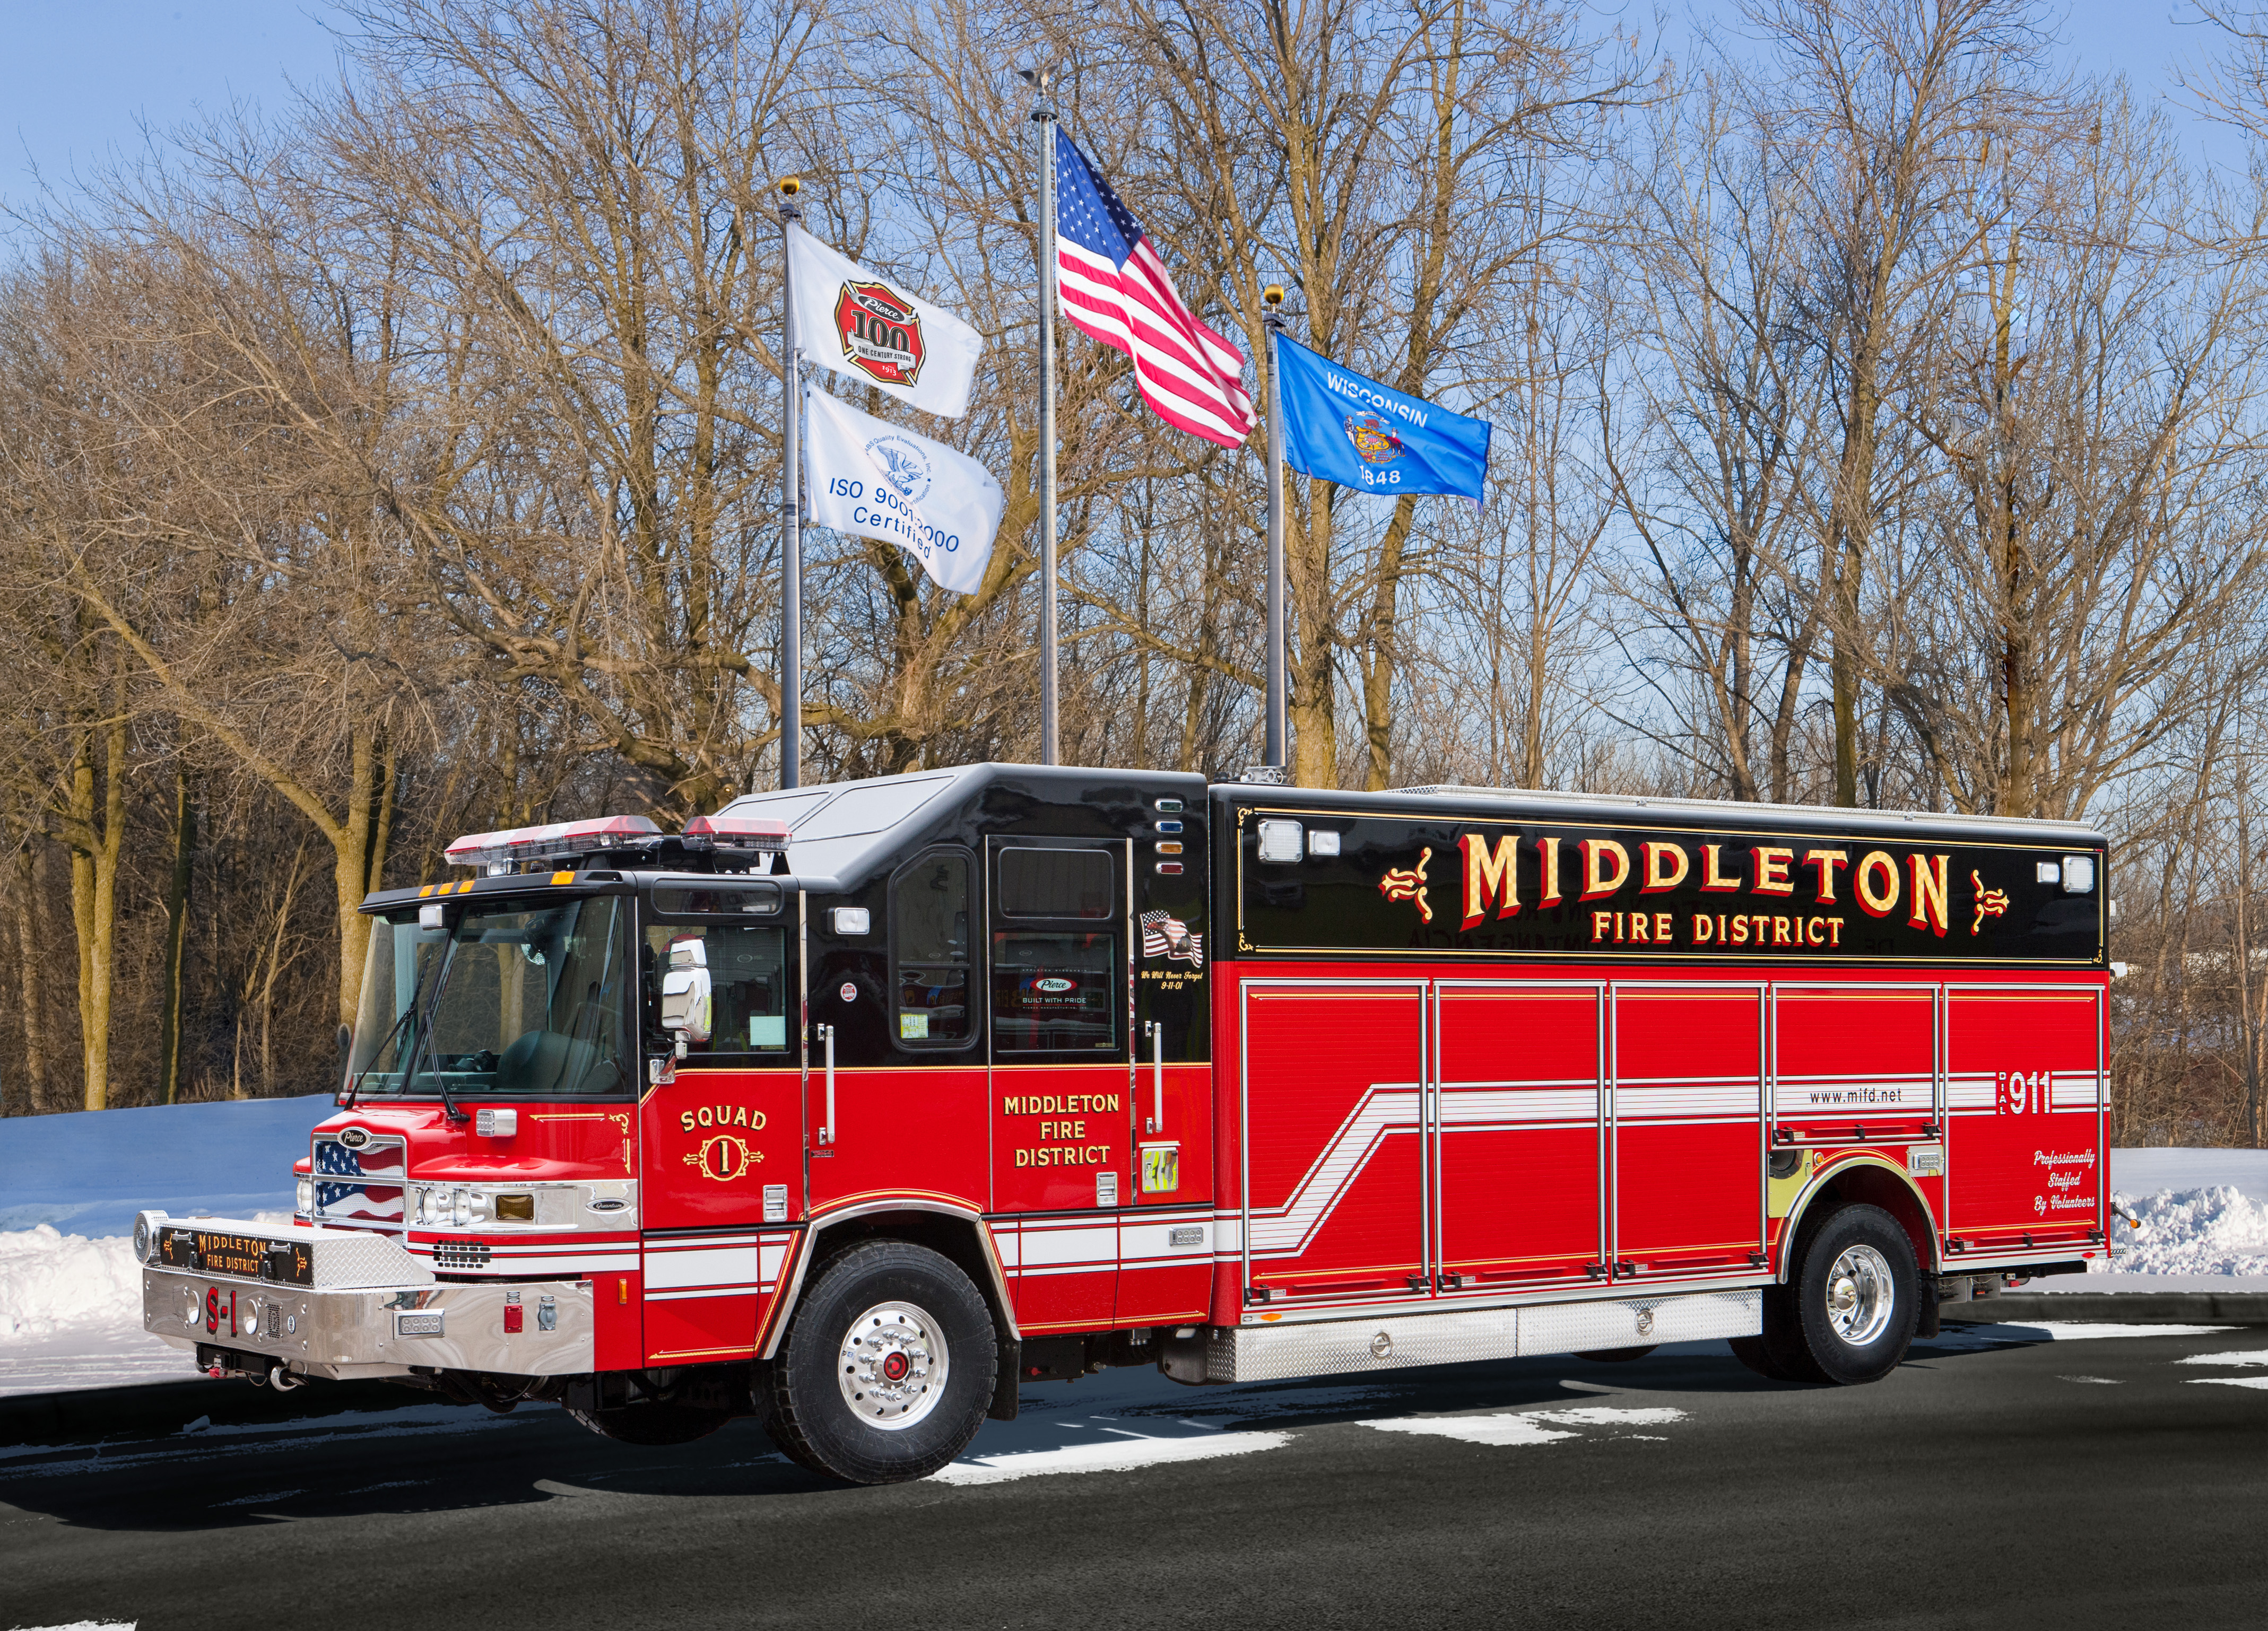 hfield wi-fire driver download